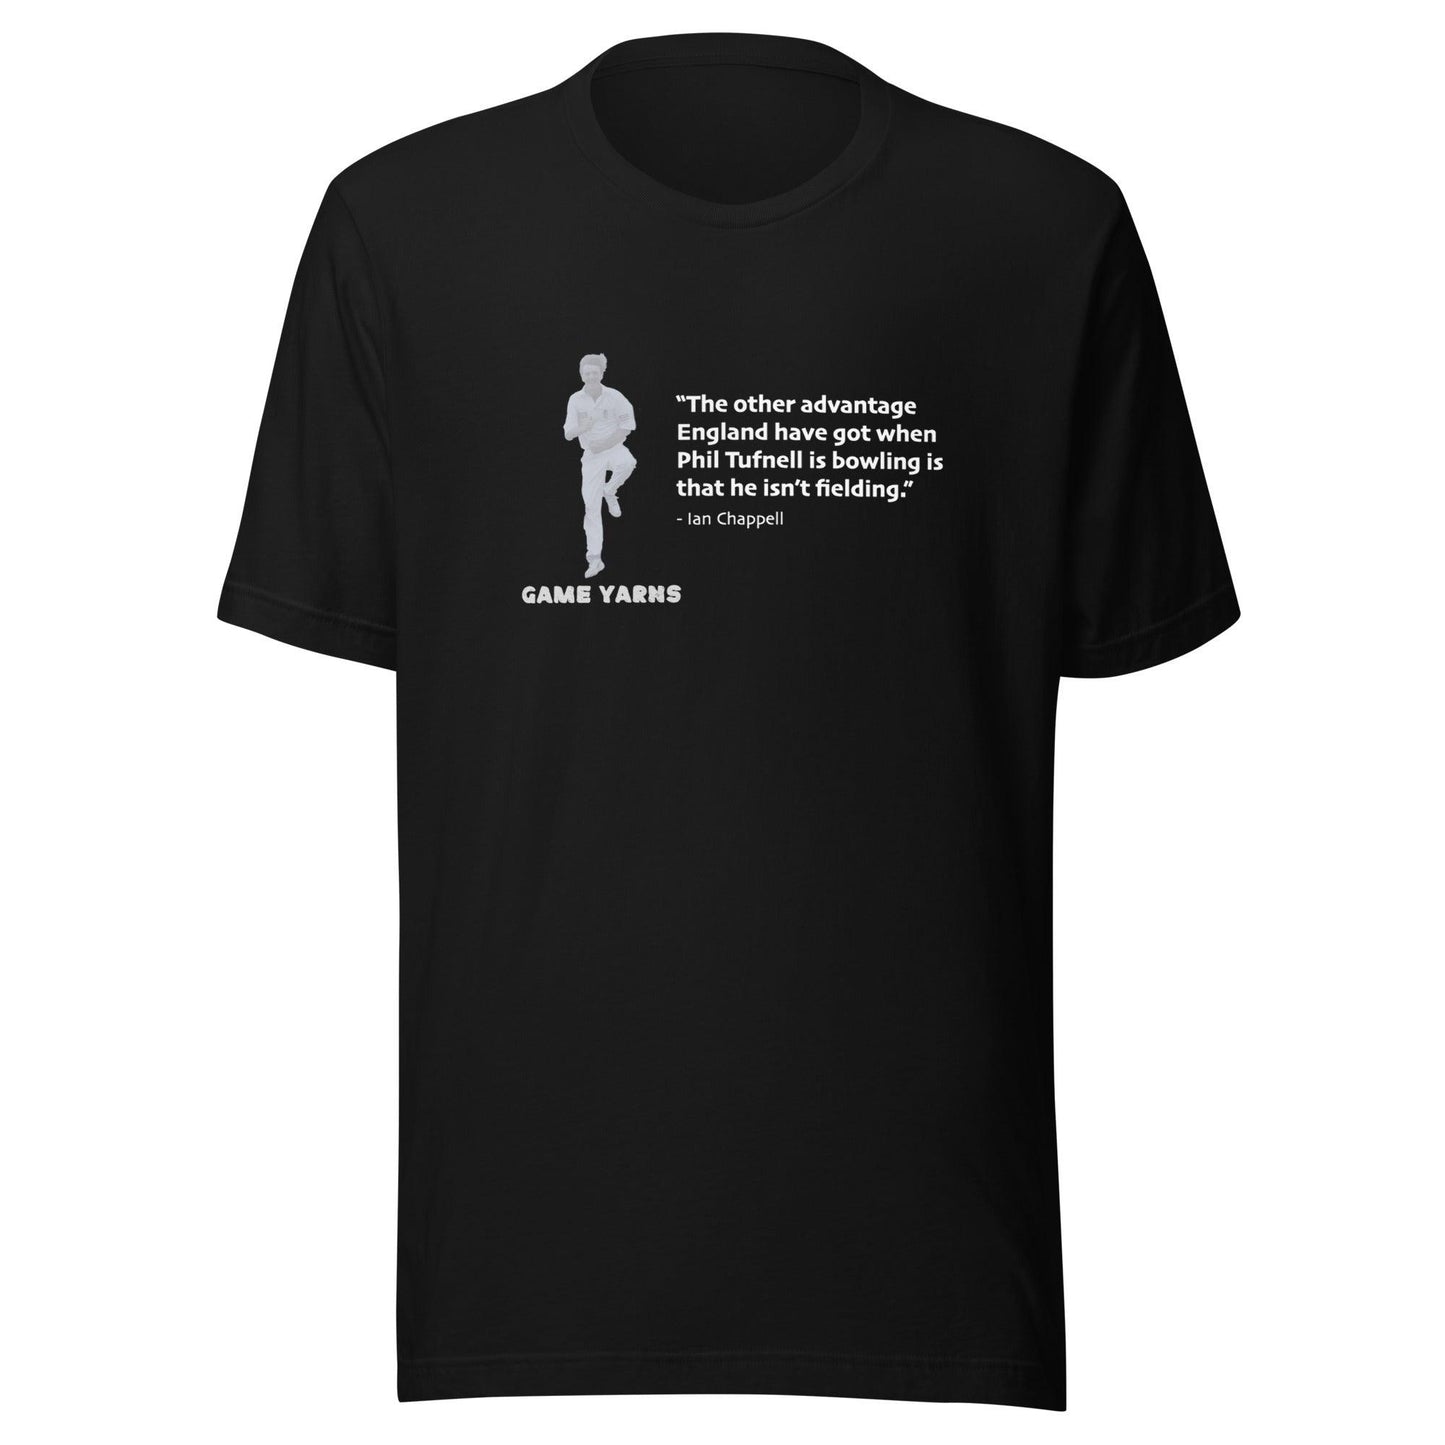 Ian Chappell on Phil Tufnell. Cricket T-shirt by Game Yarns